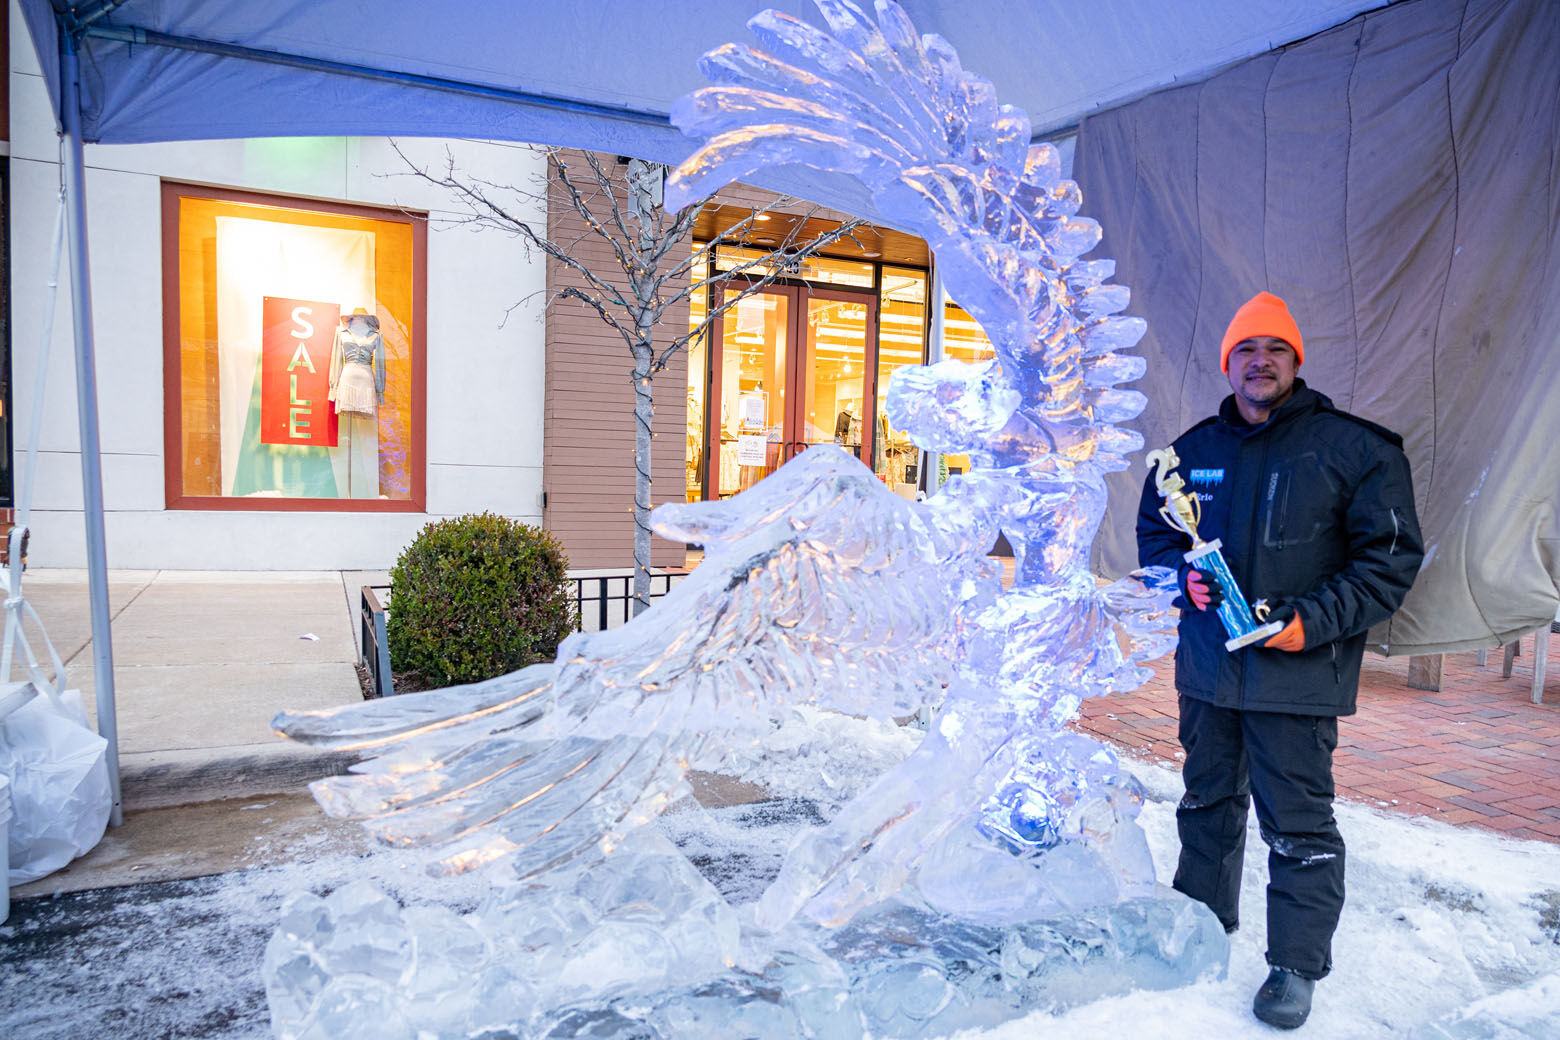 https://wtop.com/wp-content/uploads/2023/01/Ice-carver-and-carving.jpg